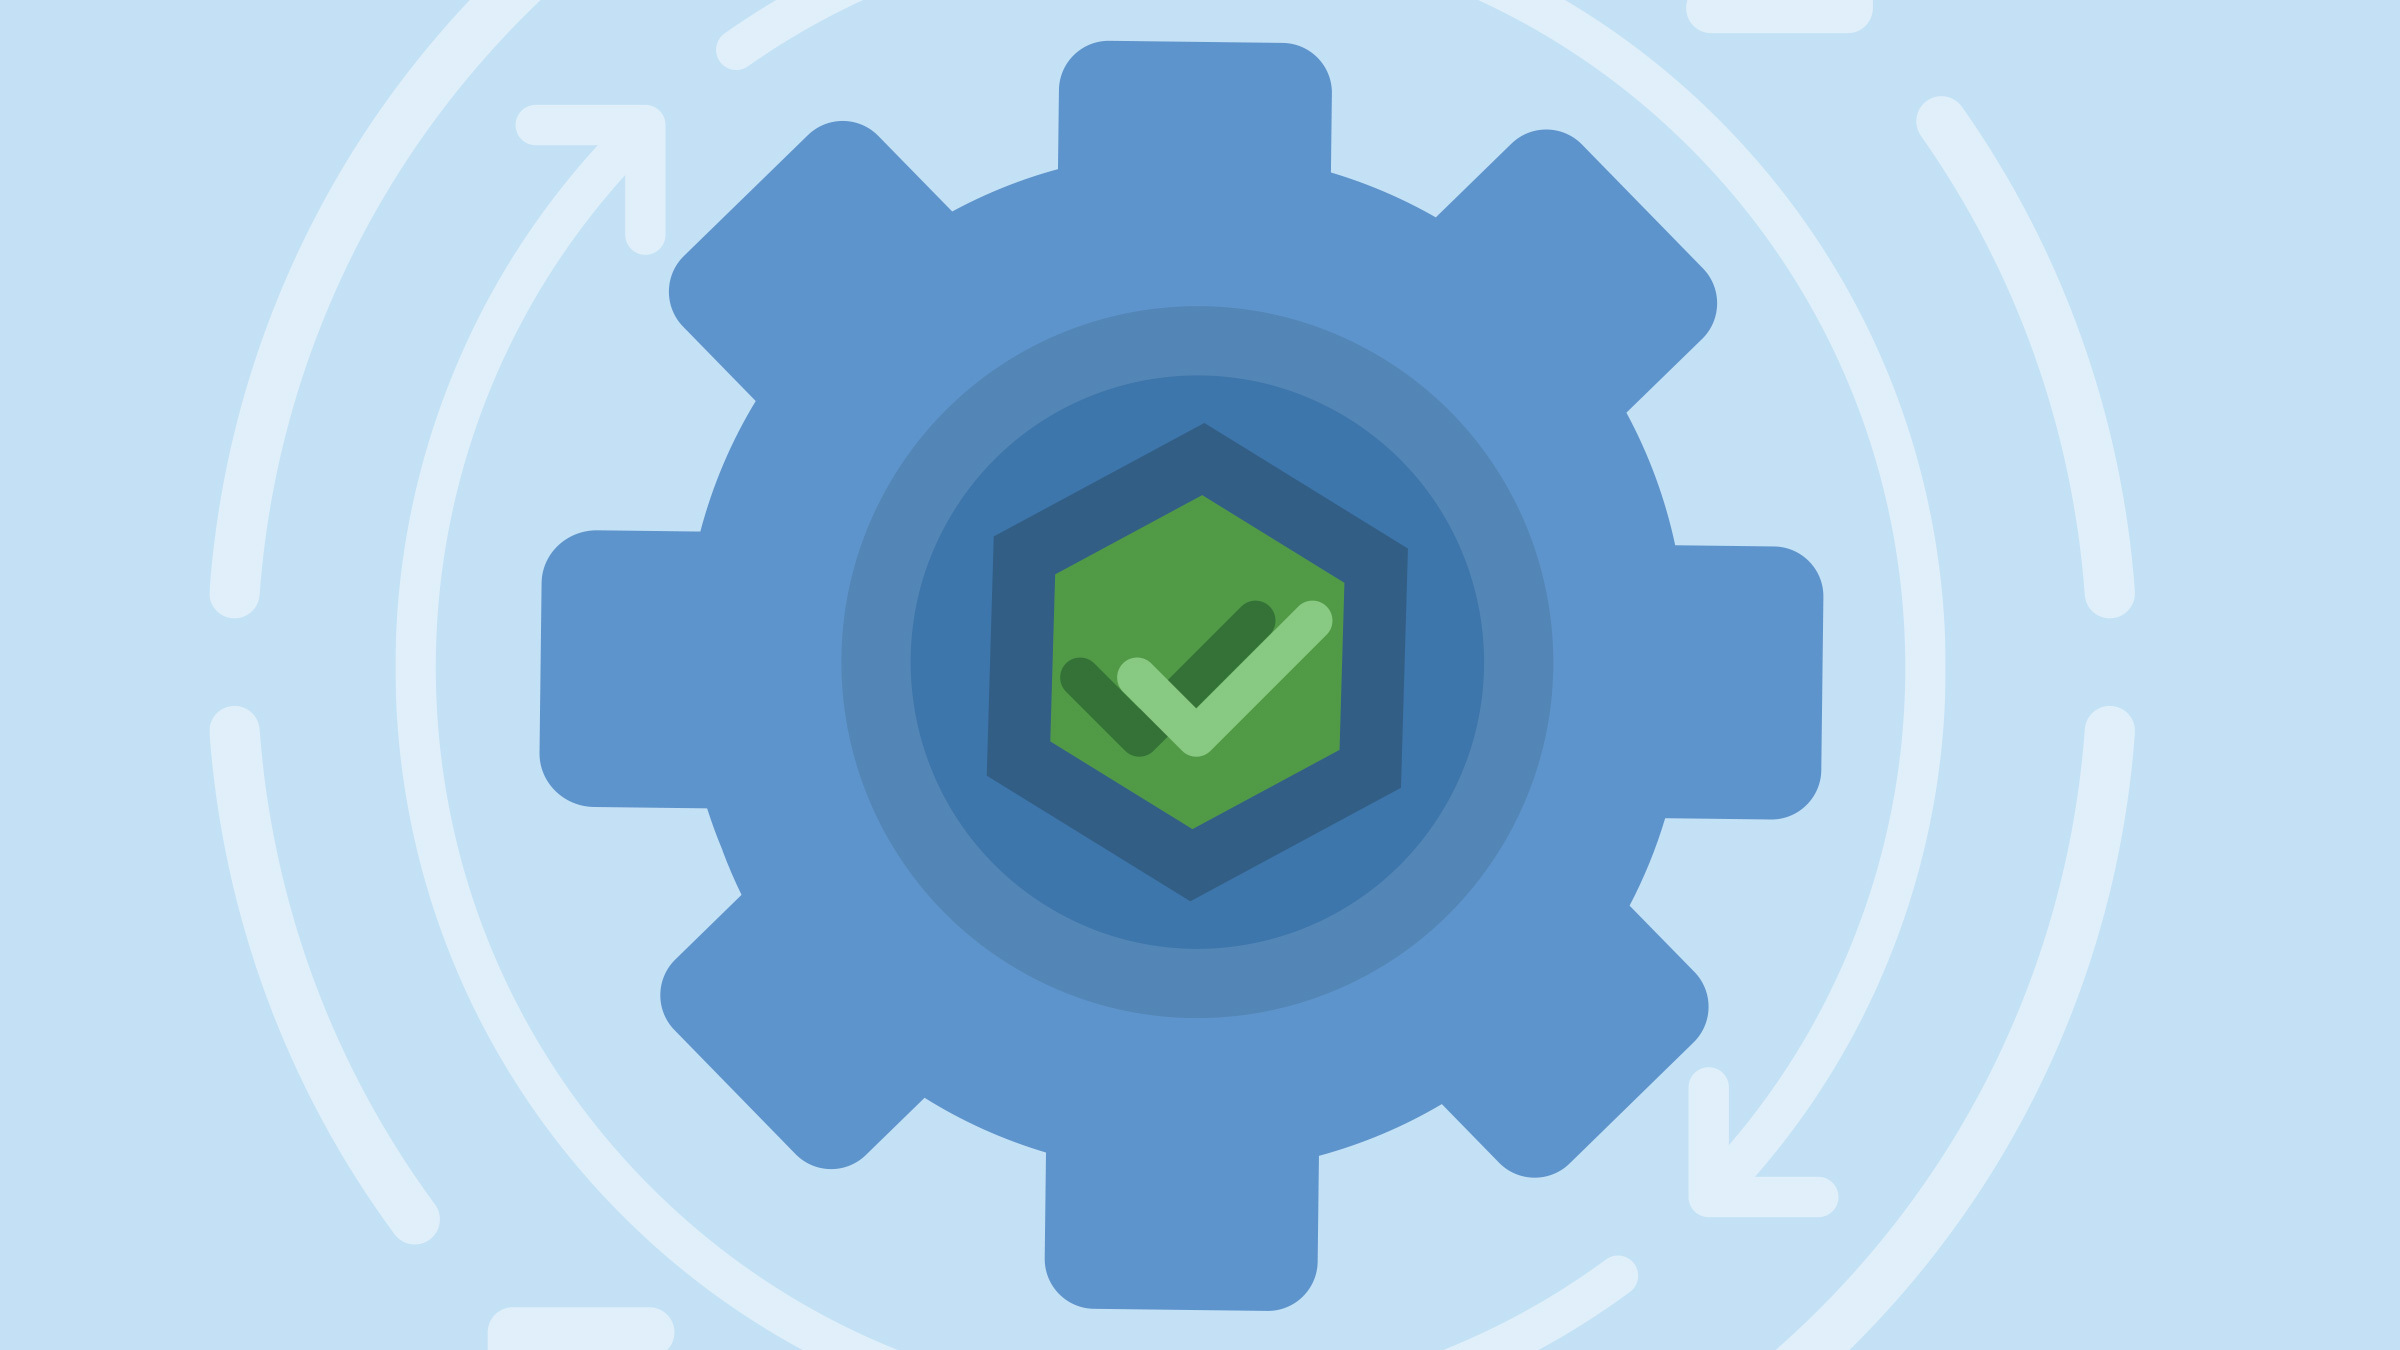 blue gear with a green checkmark in its center, illustration